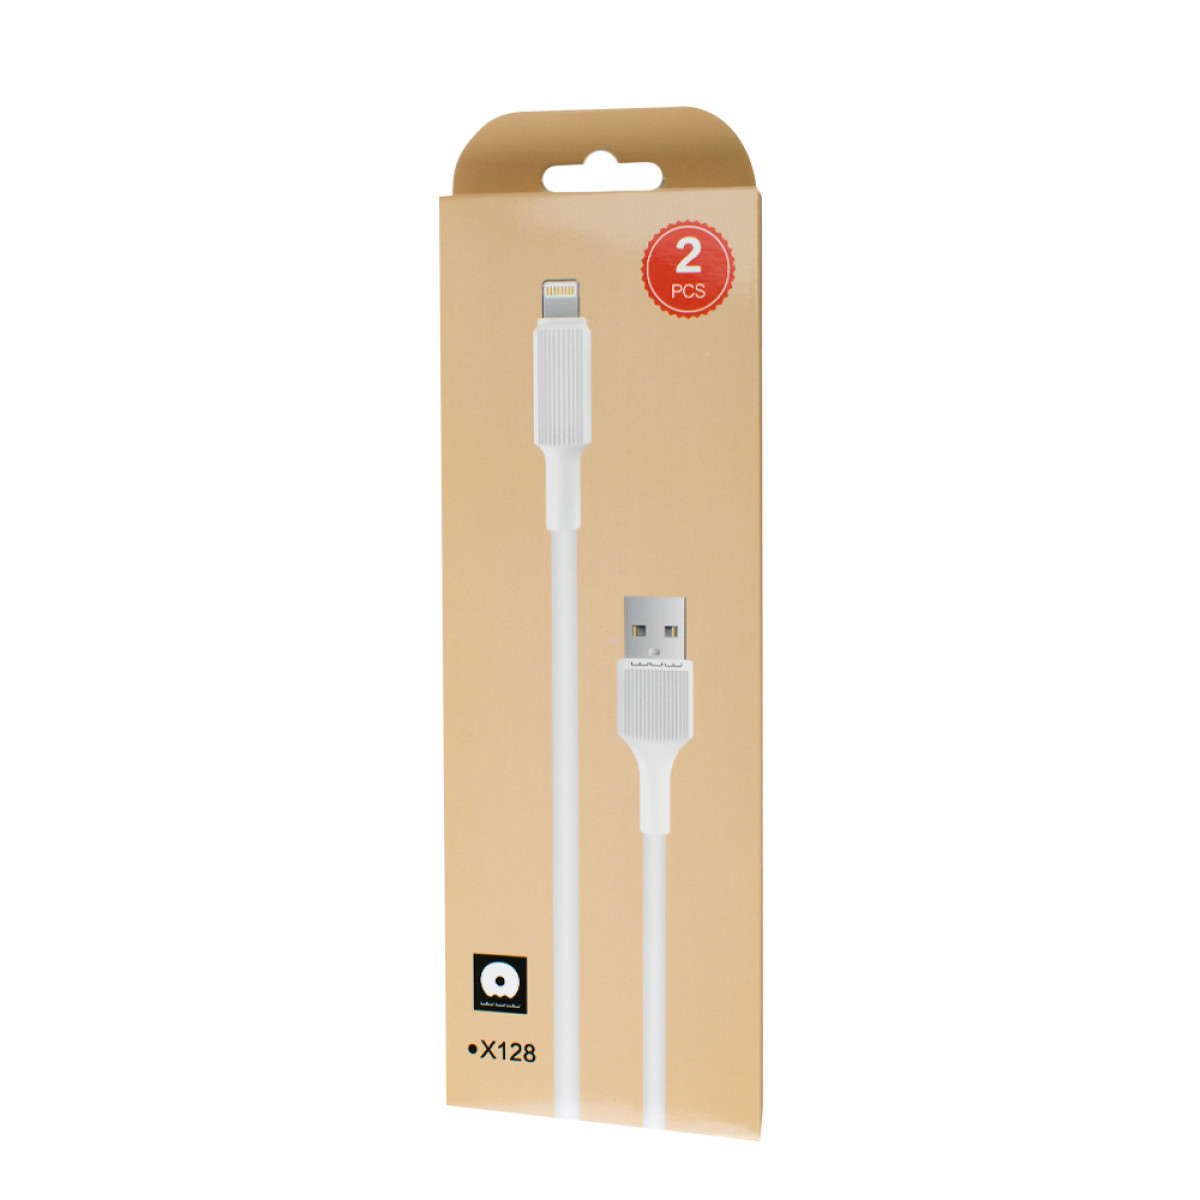 WUW Lightning Charge Cable 2pcs X128